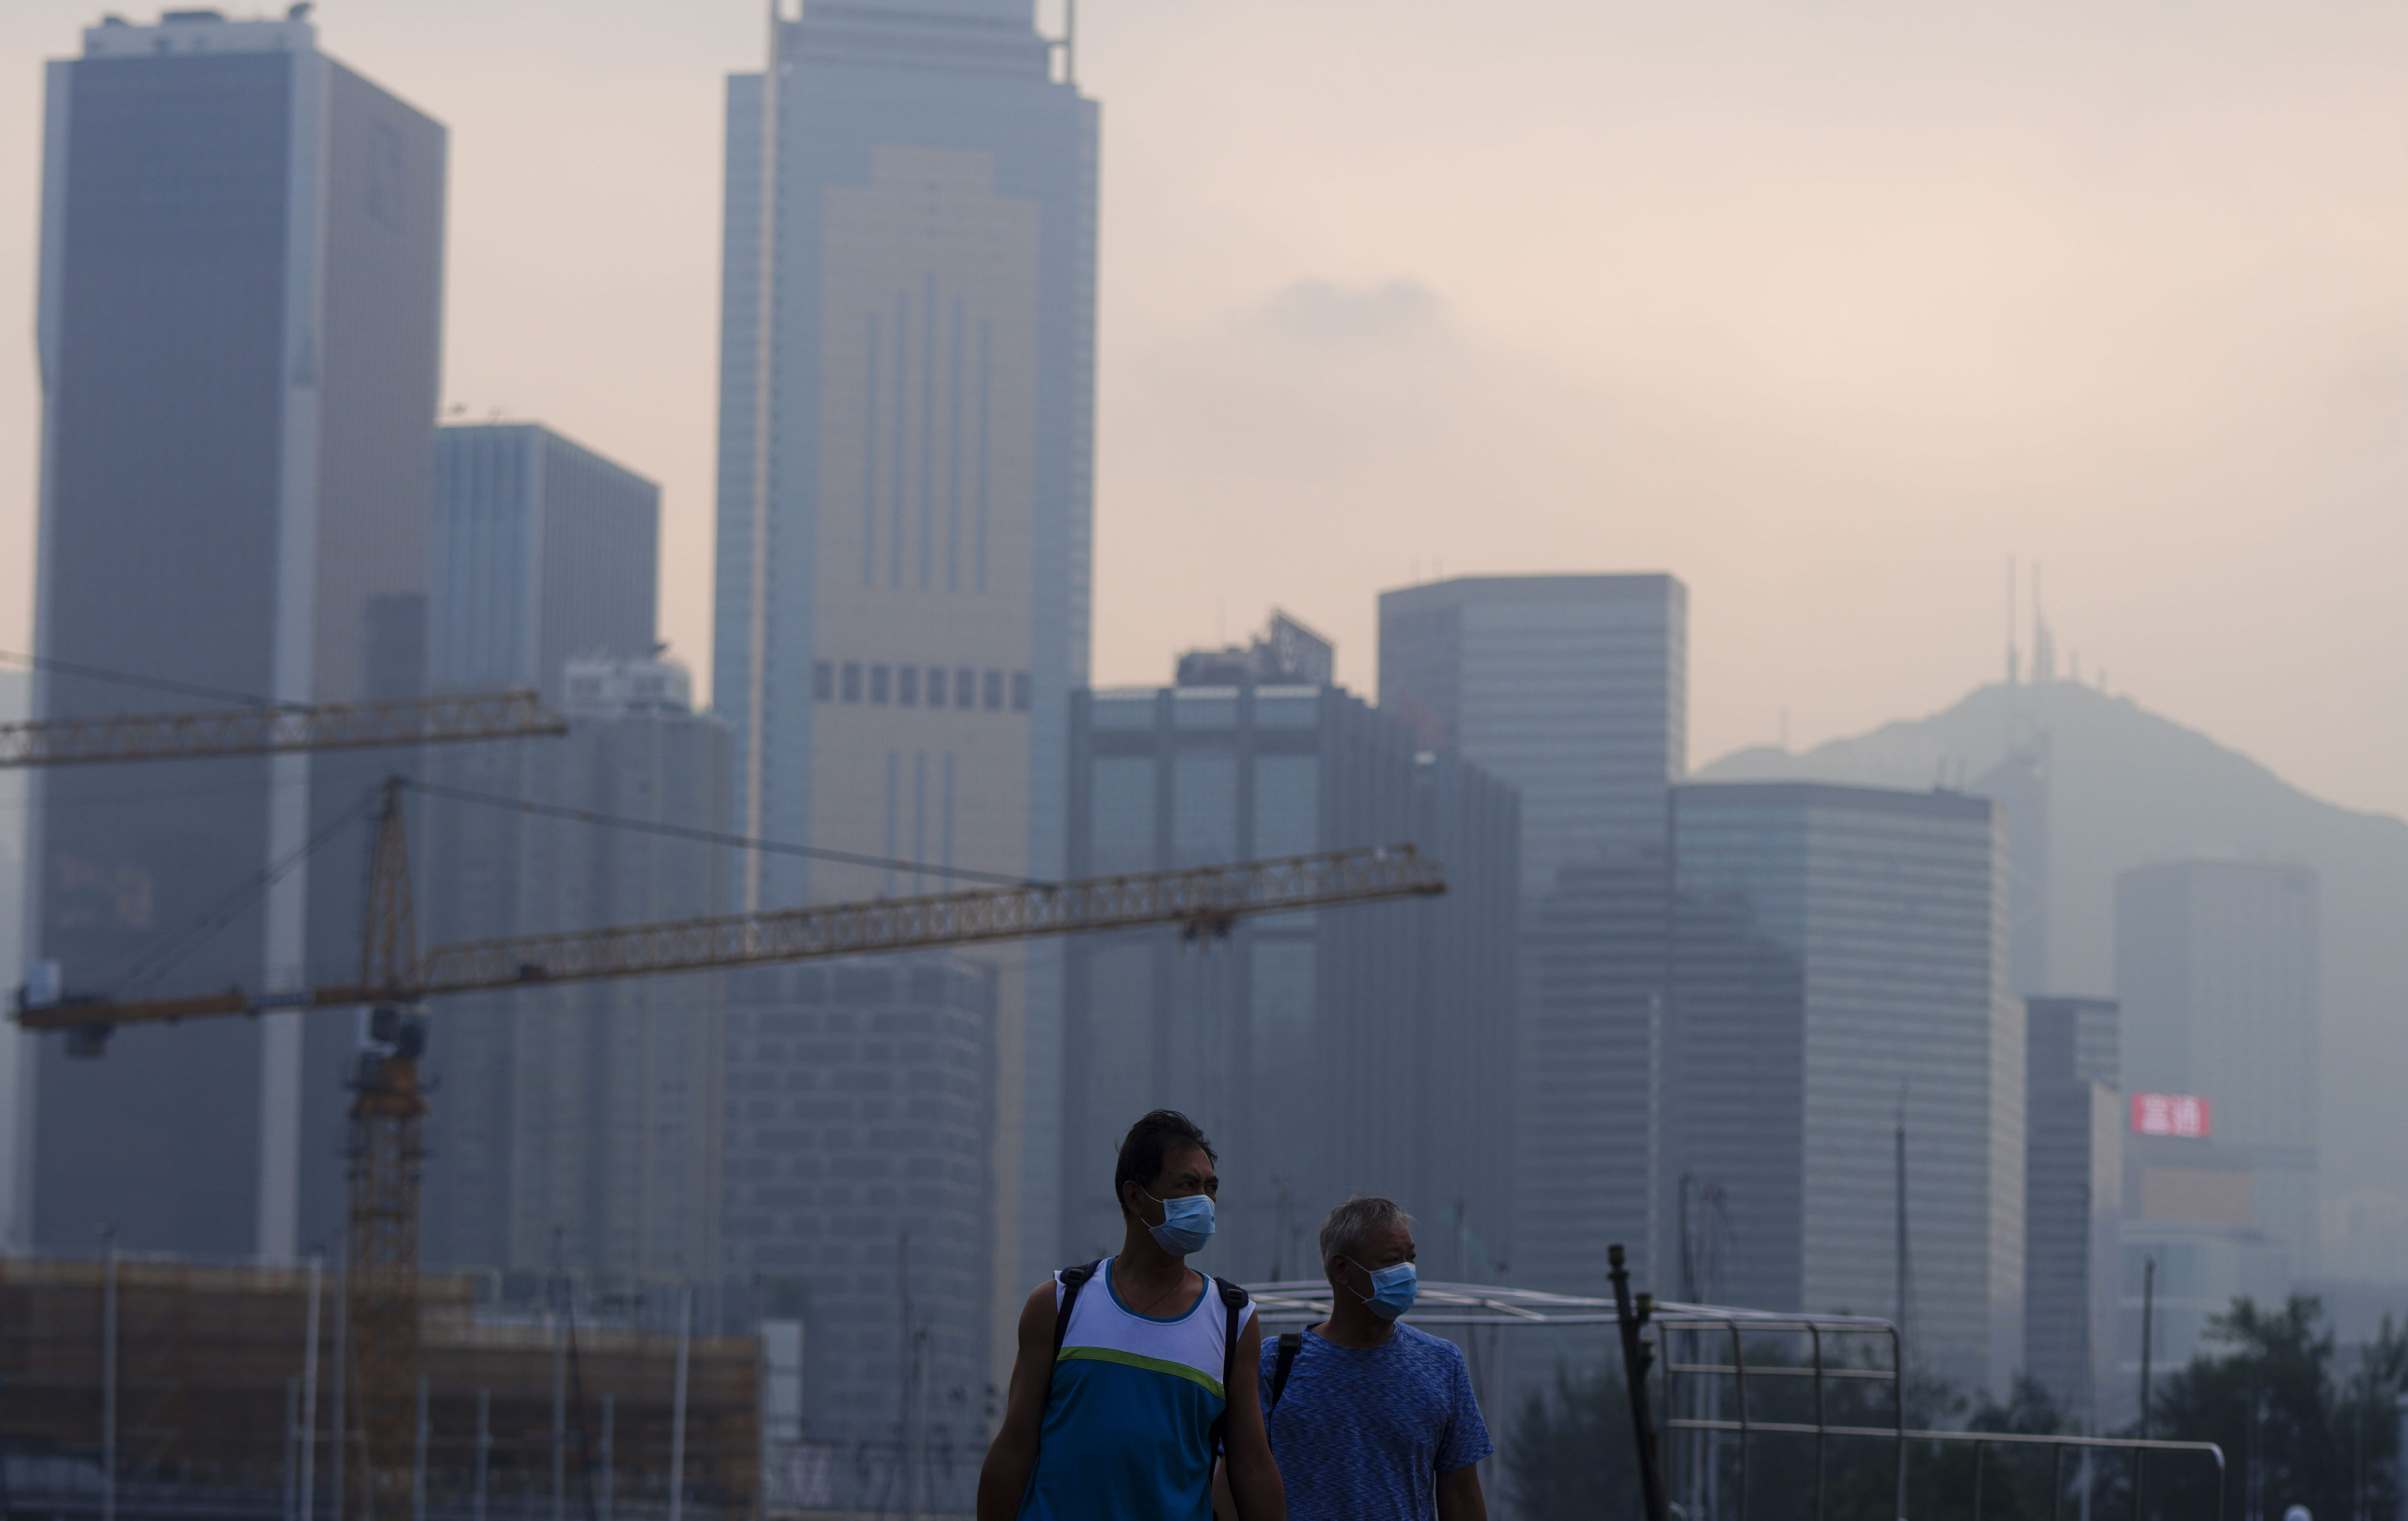 People wear masks in Causeway Bay as Hong Kong experiences high pollution levels on September 1, 2020. Photo: Sam Tsang